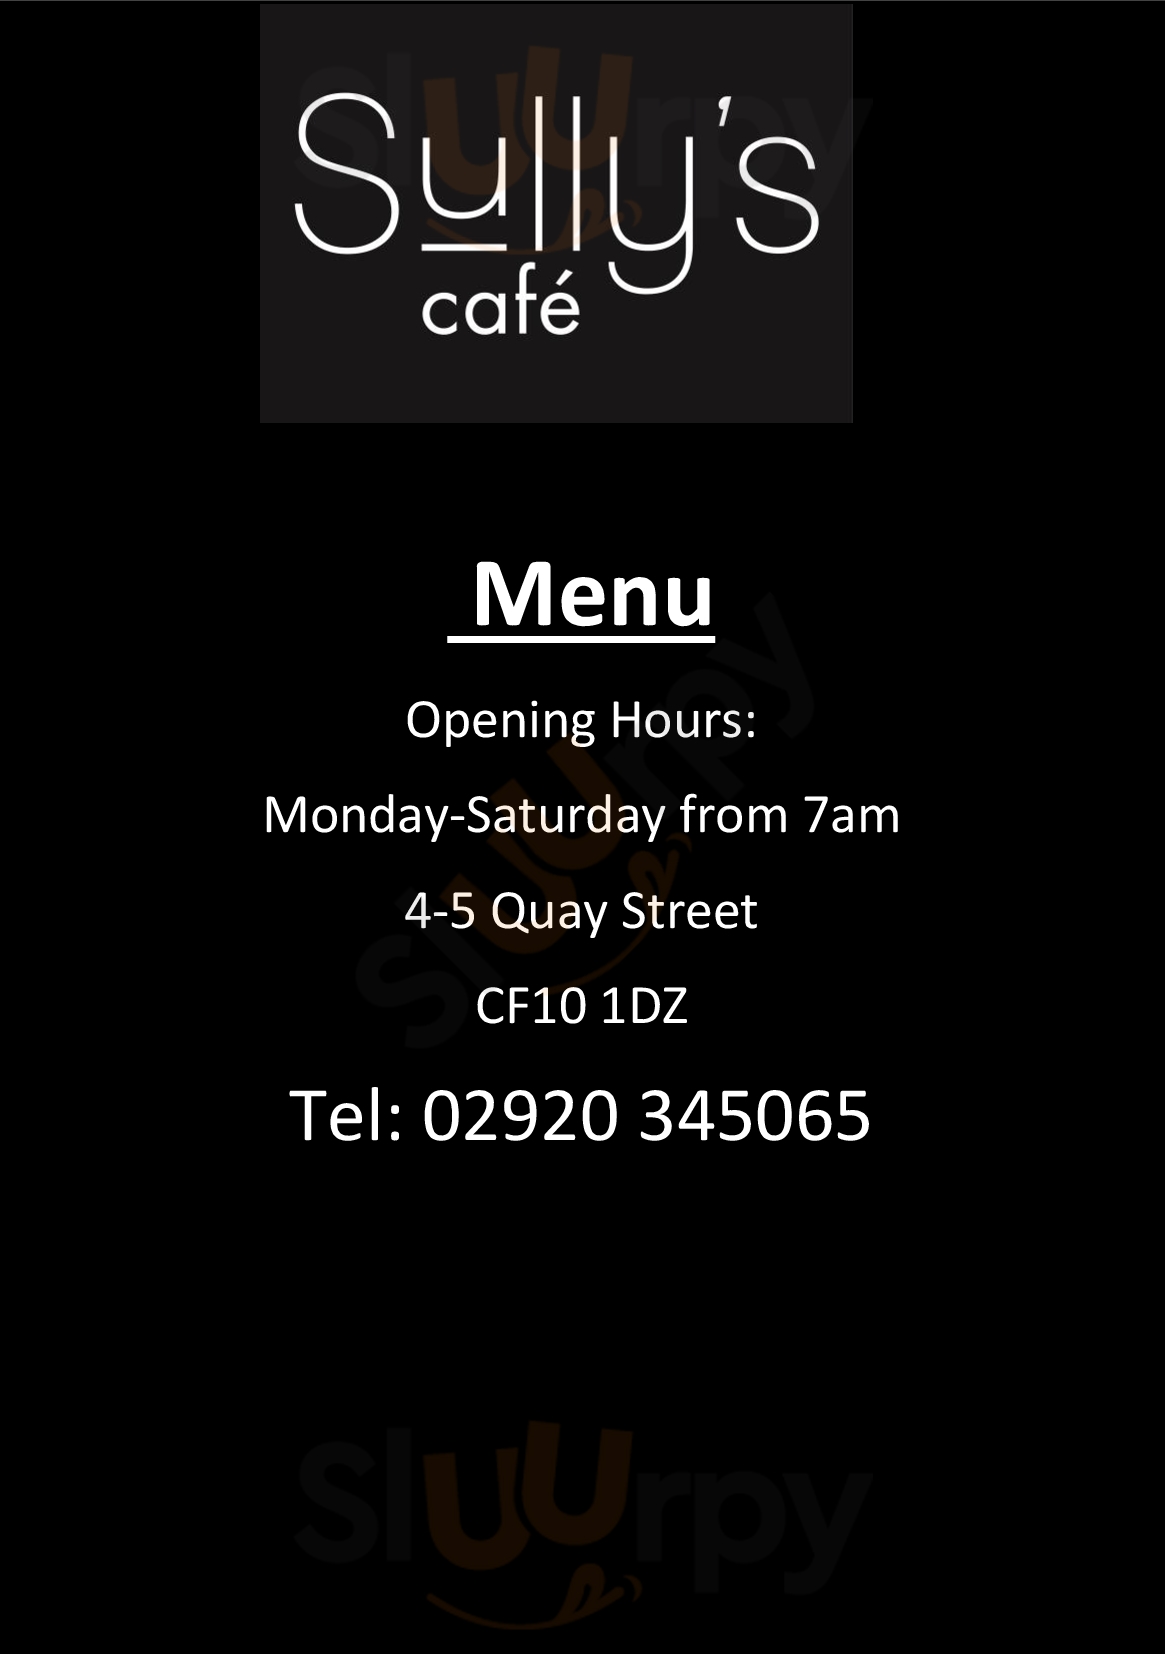 Sully's Cafe Cardiff Menu - 1